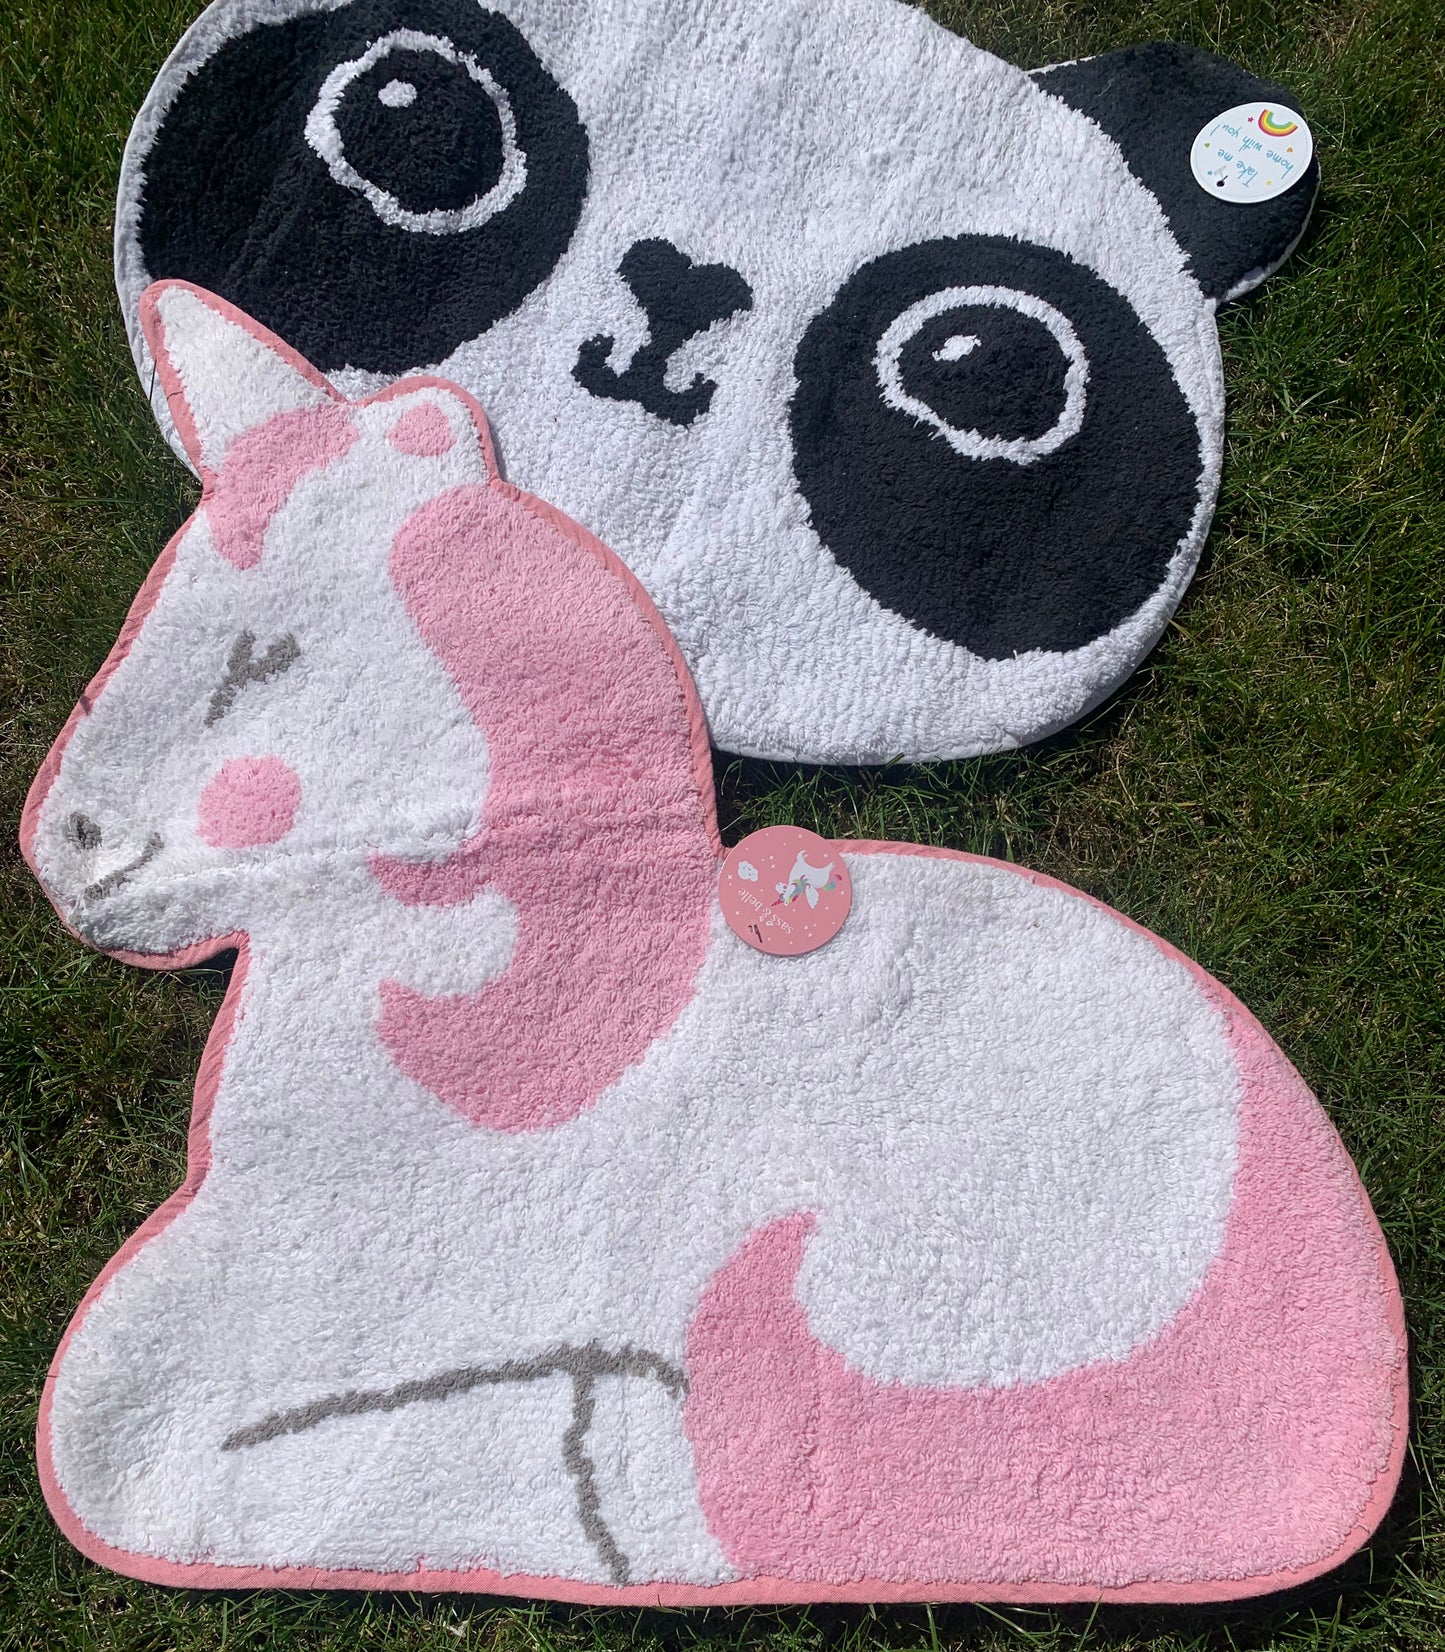 Children’s Bedroom Rugs - 2 styles available